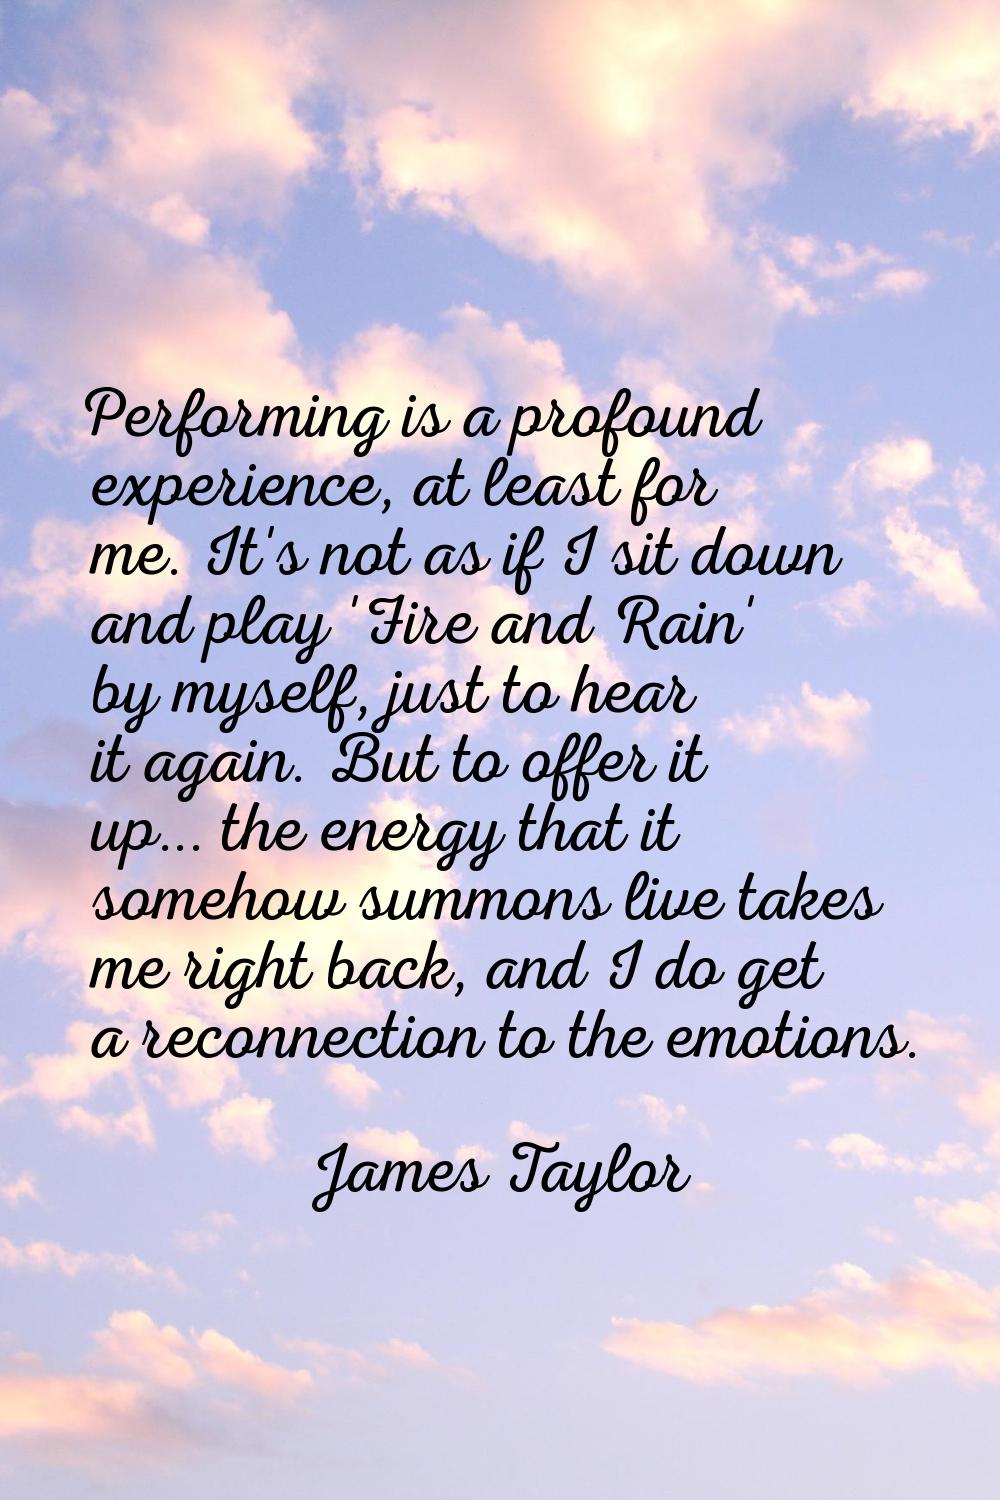 Performing is a profound experience, at least for me. It's not as if I sit down and play 'Fire and 